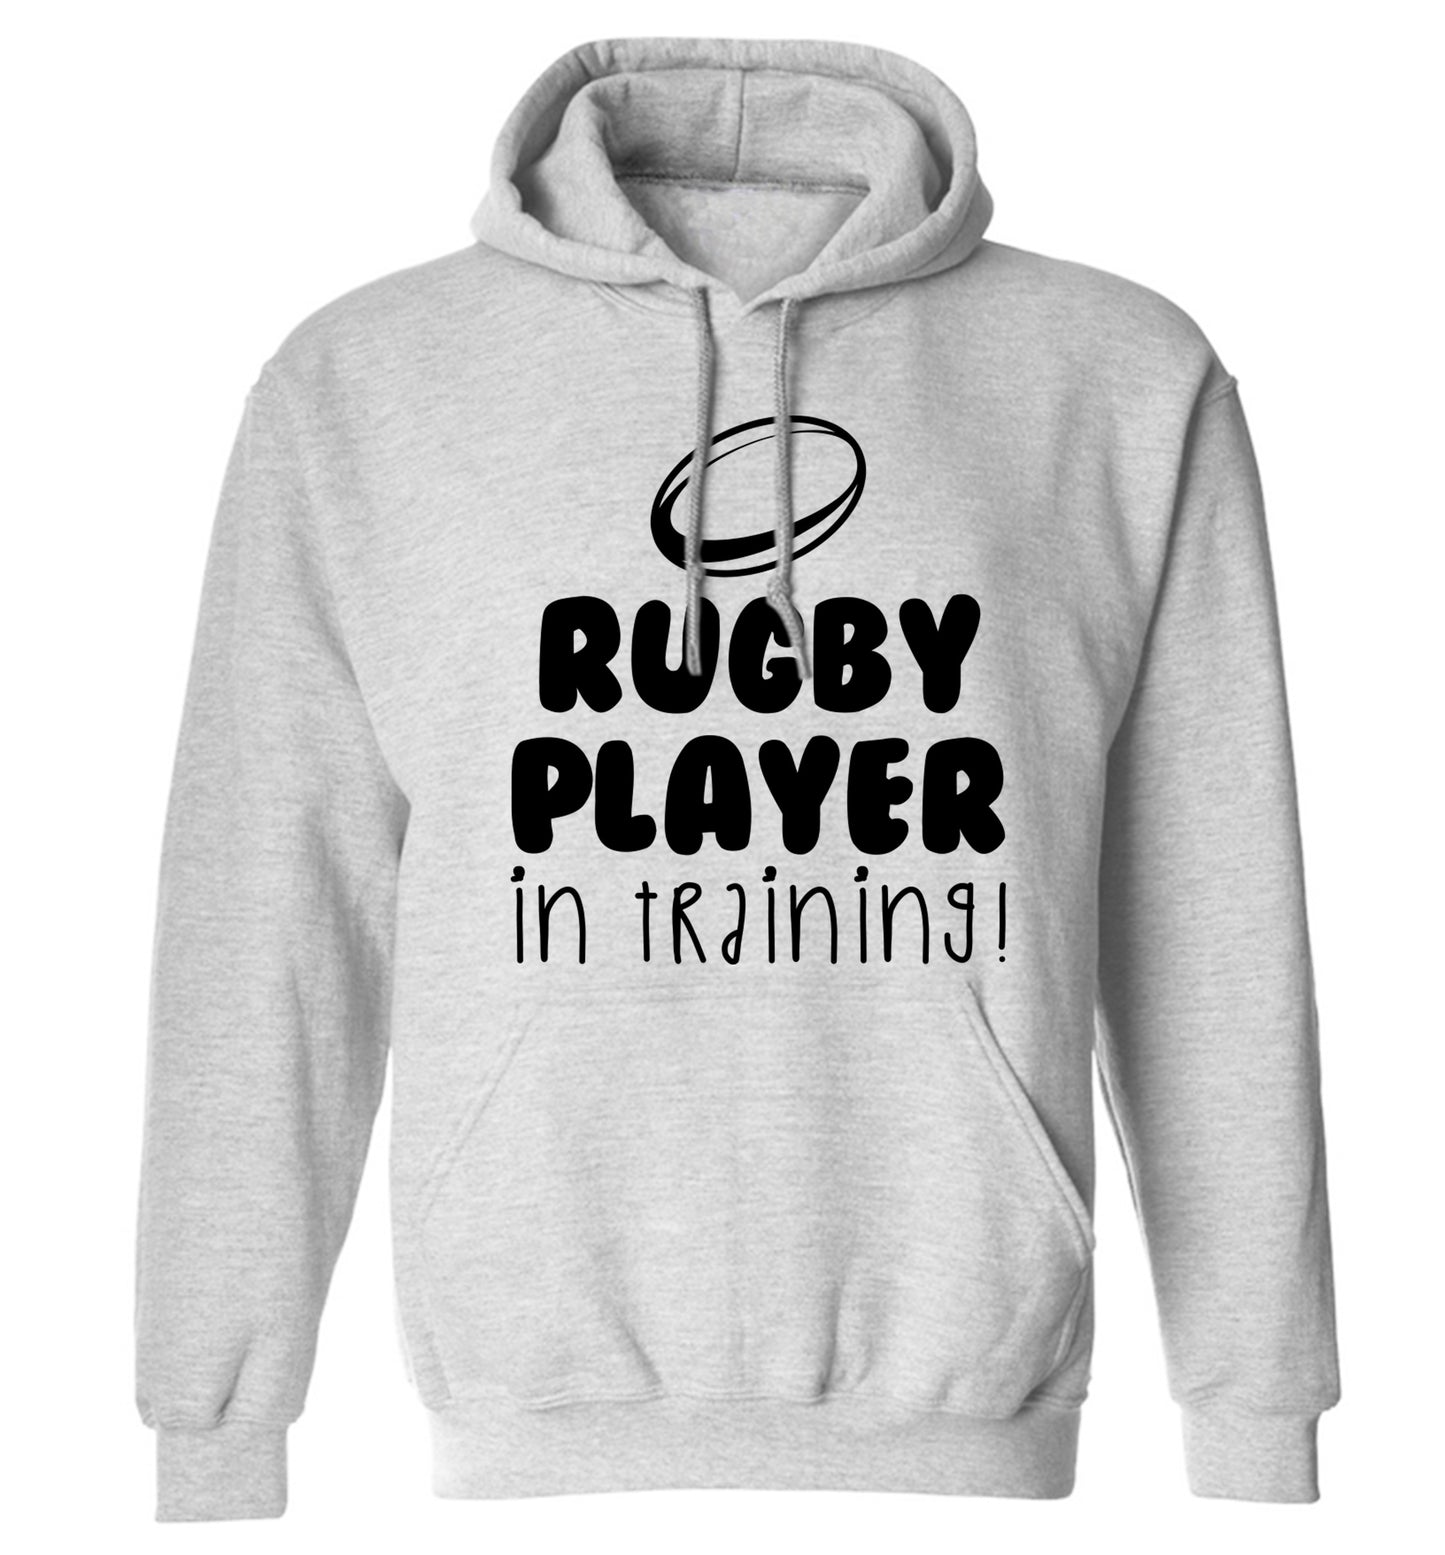 Rugby player in training adults unisex grey hoodie 2XL